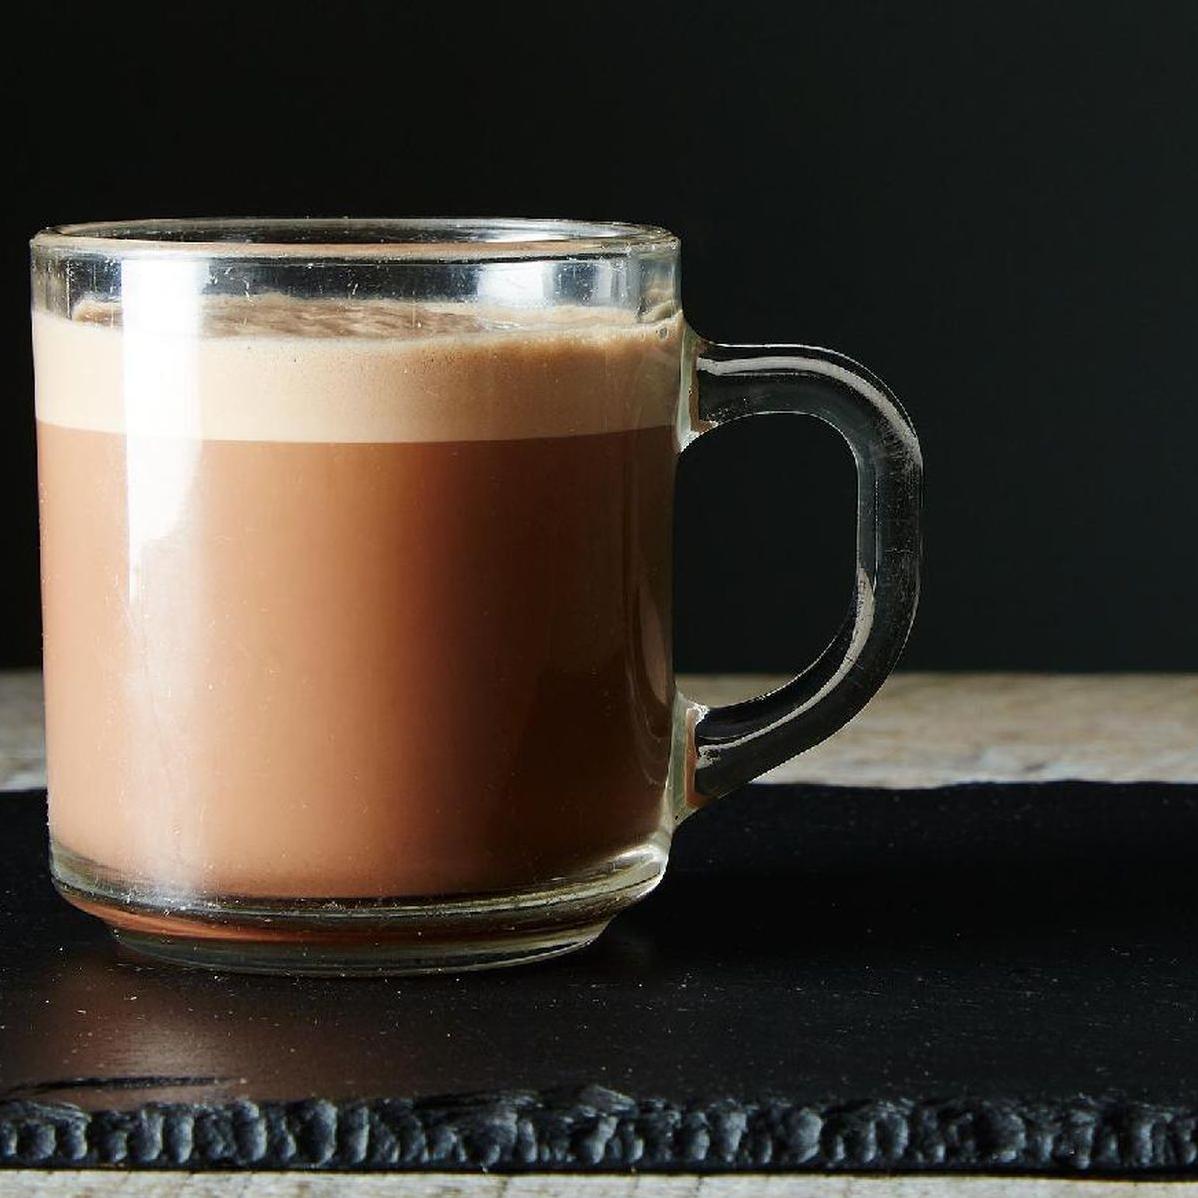  Thick and indulgent, this hot chocolate recipe is not for the faint of heart.